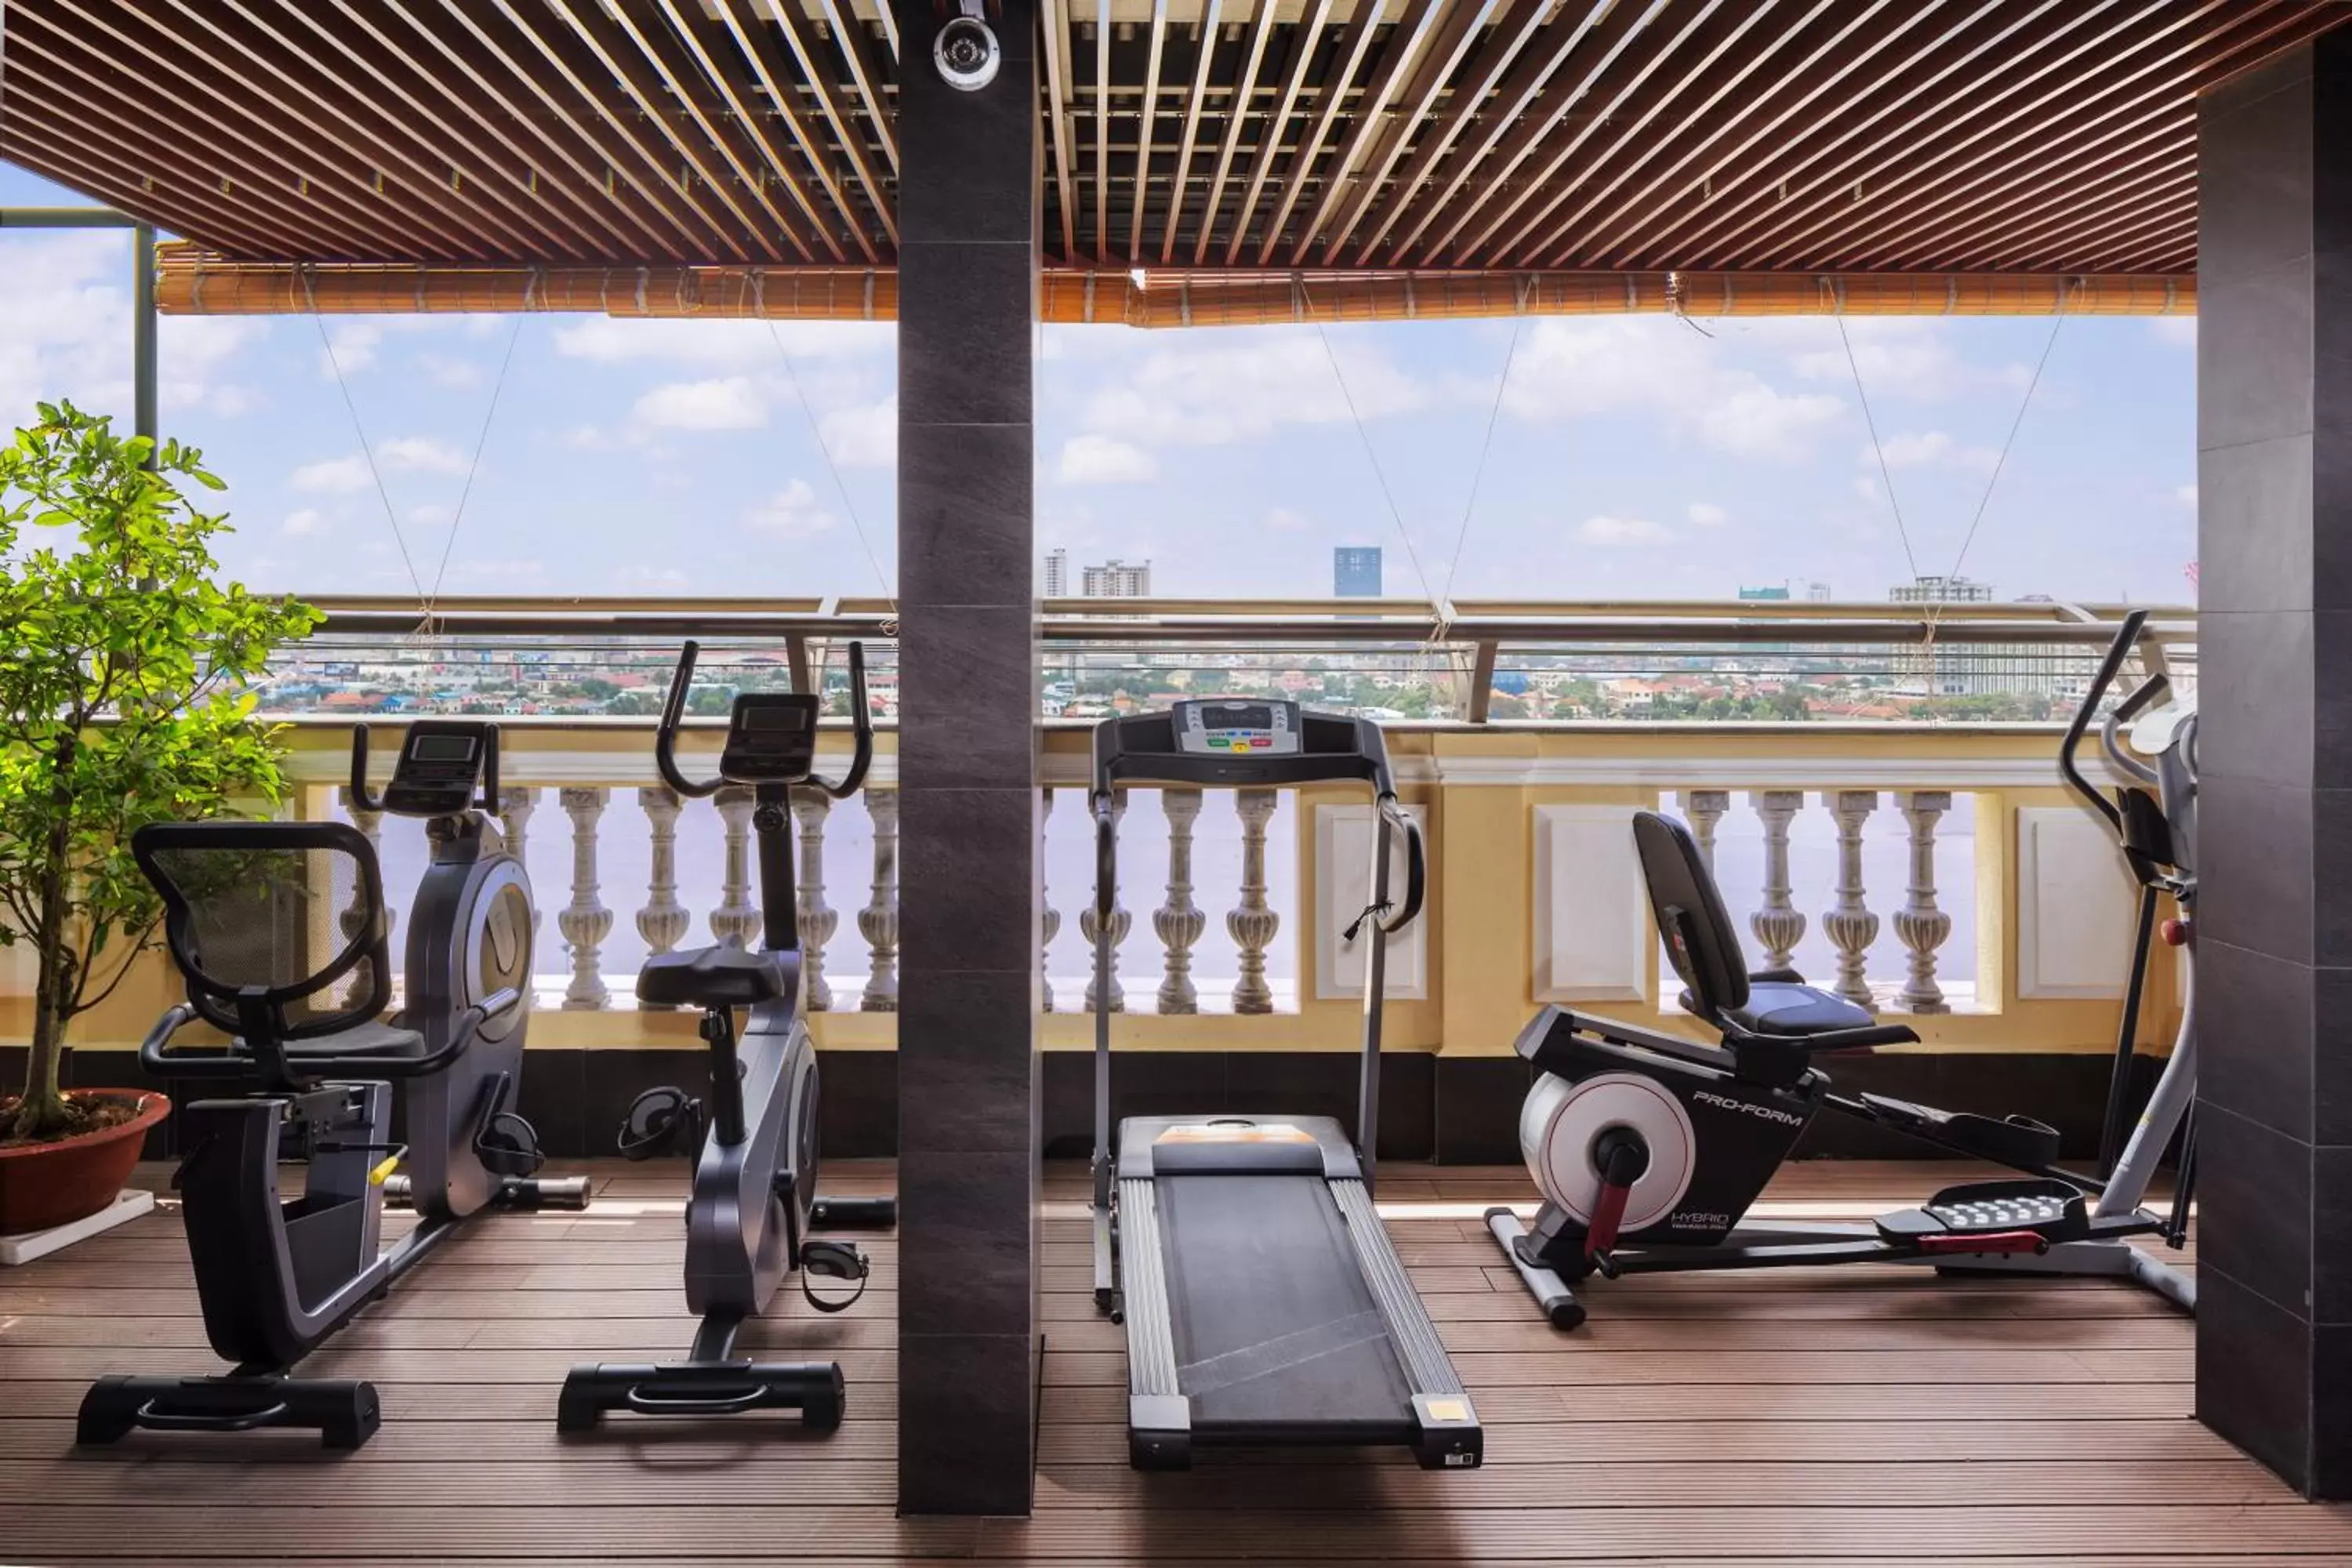 Fitness centre/facilities, Fitness Center/Facilities in LCS Hotel & Apartment